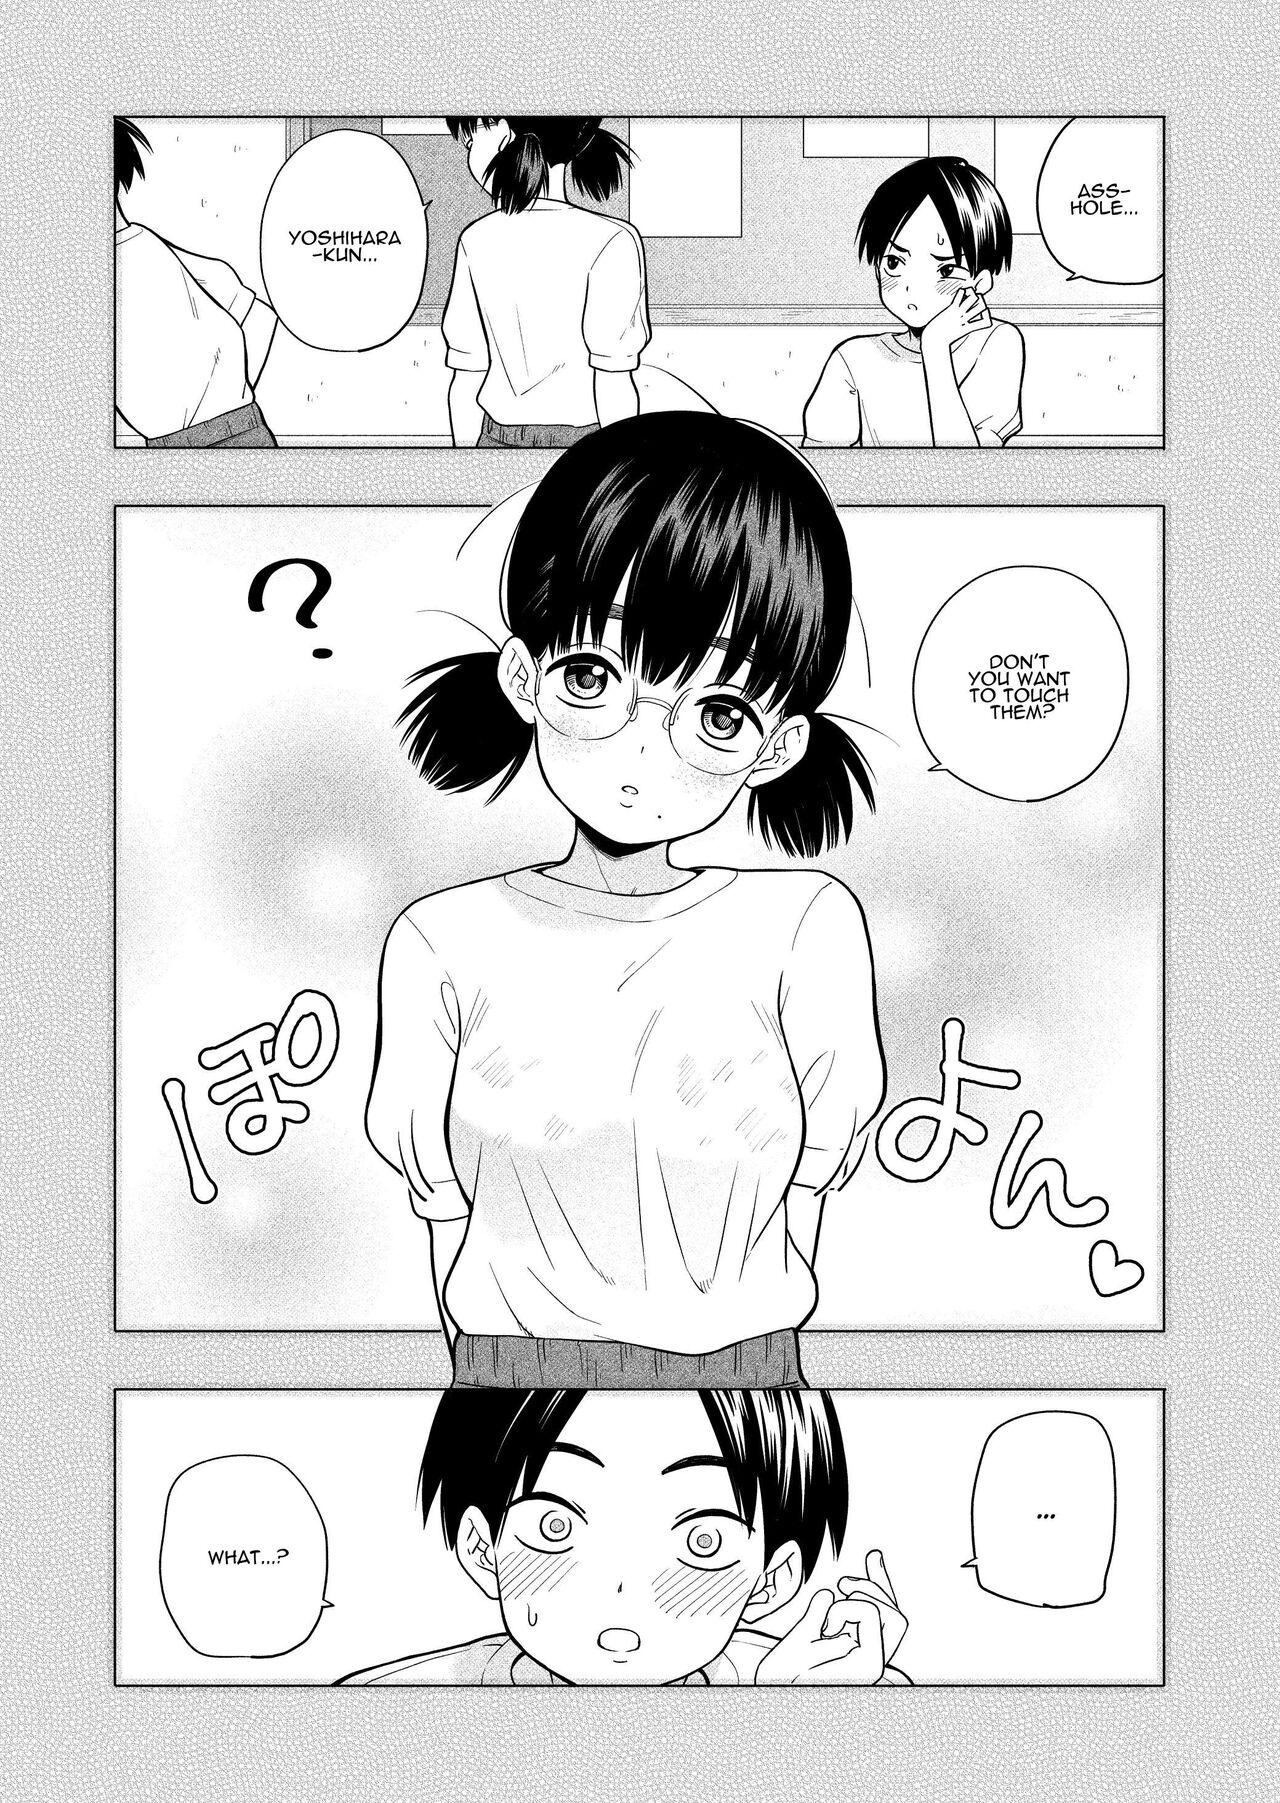 Foursome Hoshikute, Motomete. | I want, and I yearn for. - Original Relax - Page 3